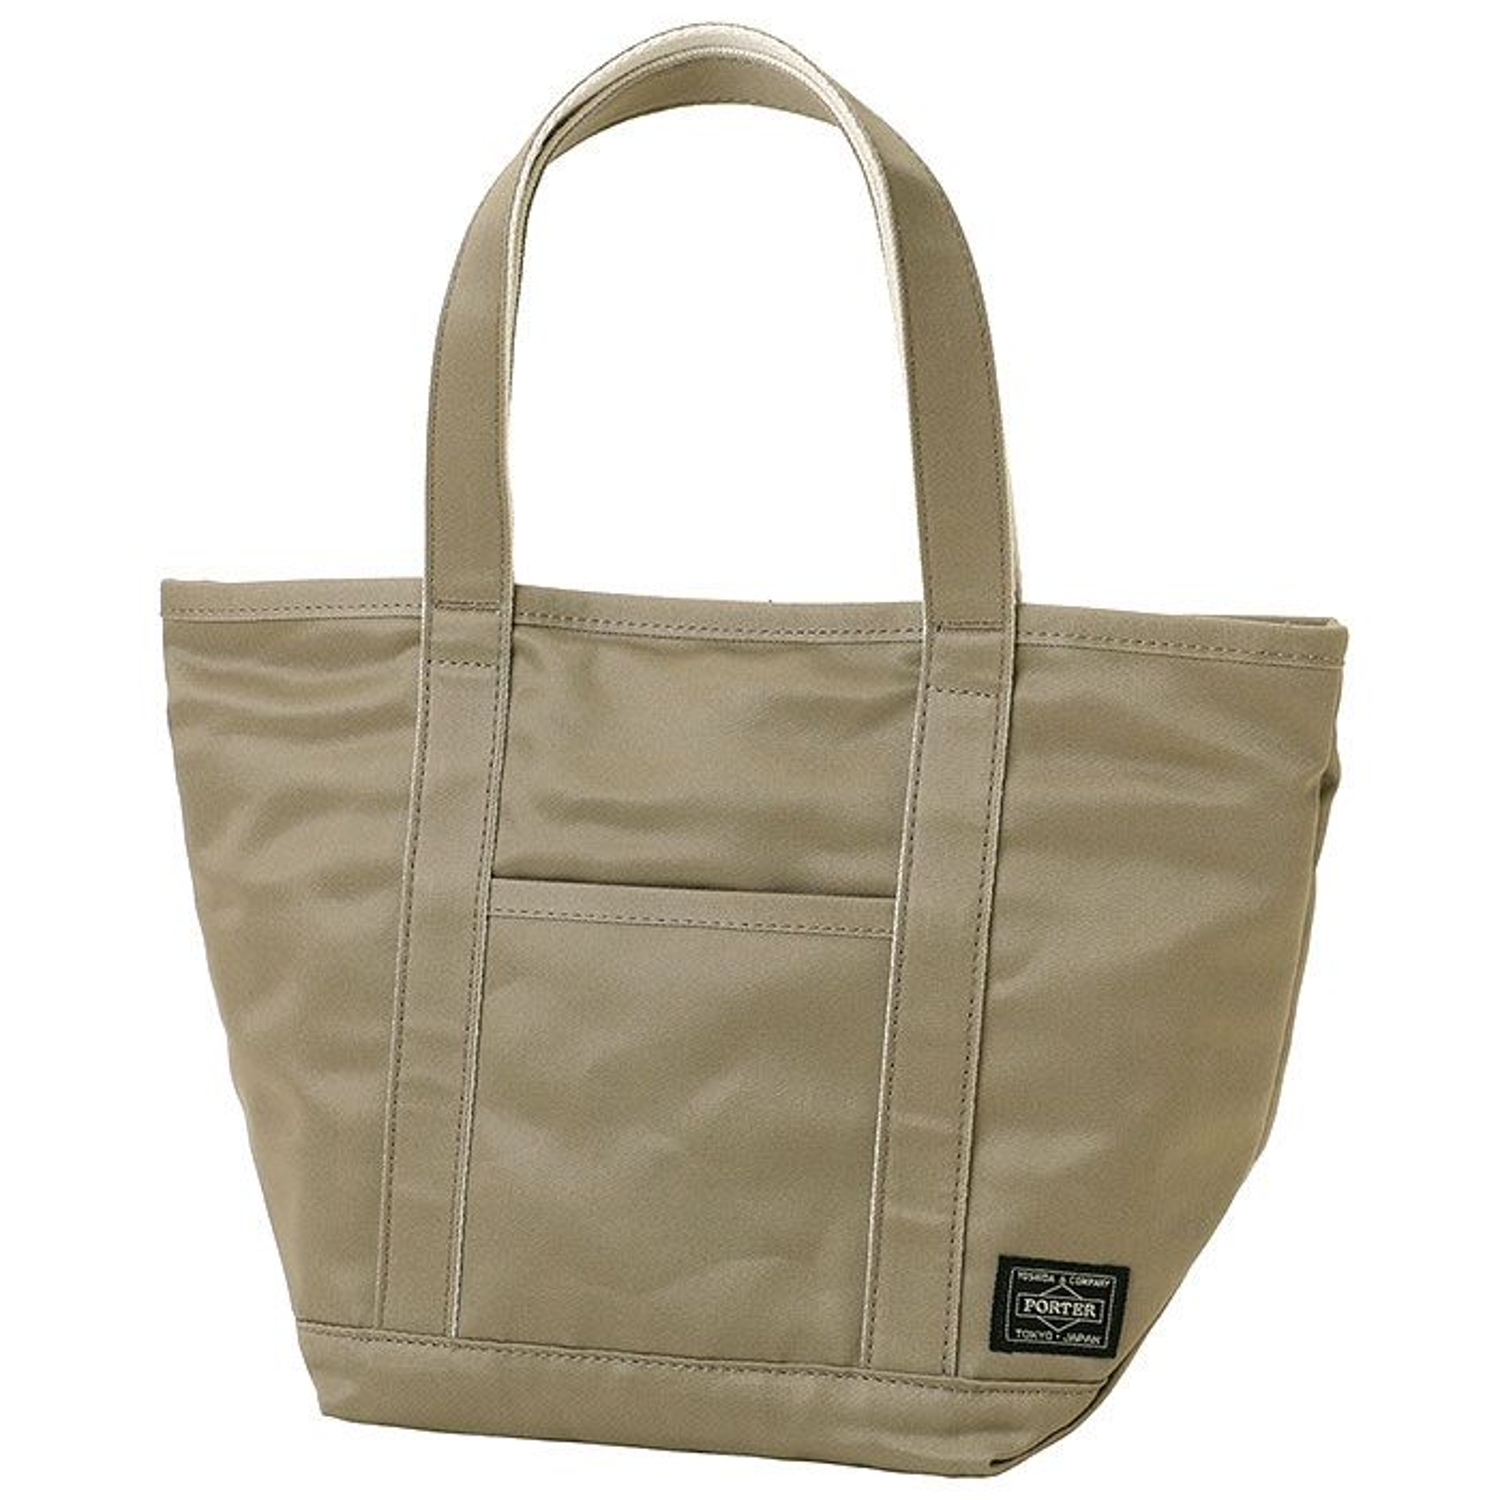 PORTER / WEAPON / TOTE BAG(S) (104696)